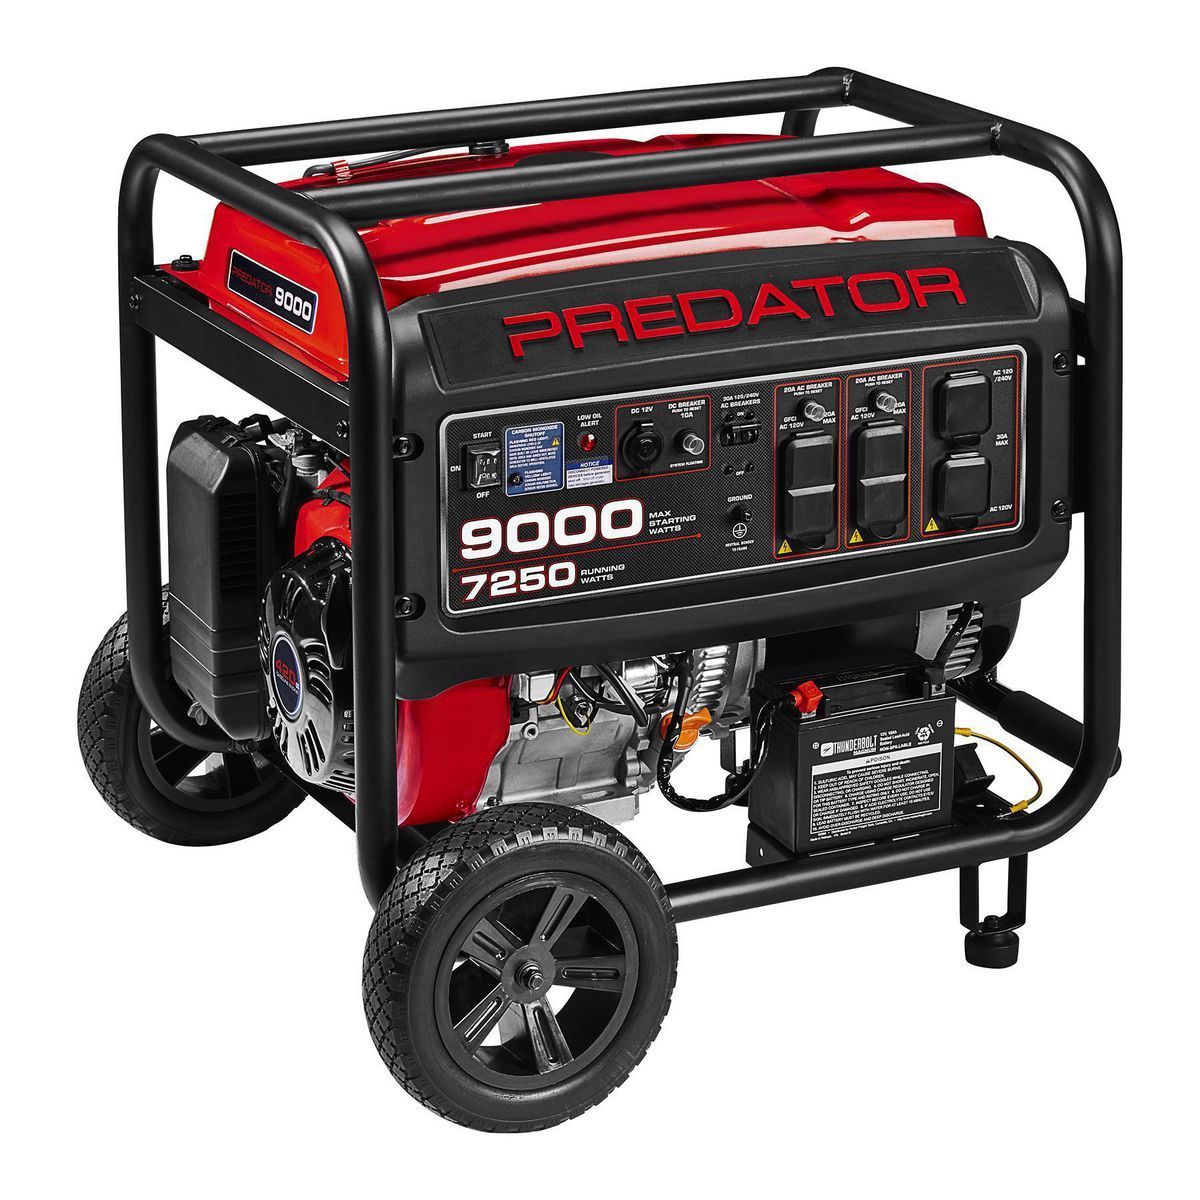 Seks Aktiver Aktiver 9000 Watt Gas Powered Portable Generator with CO SECURE Technology, CARB